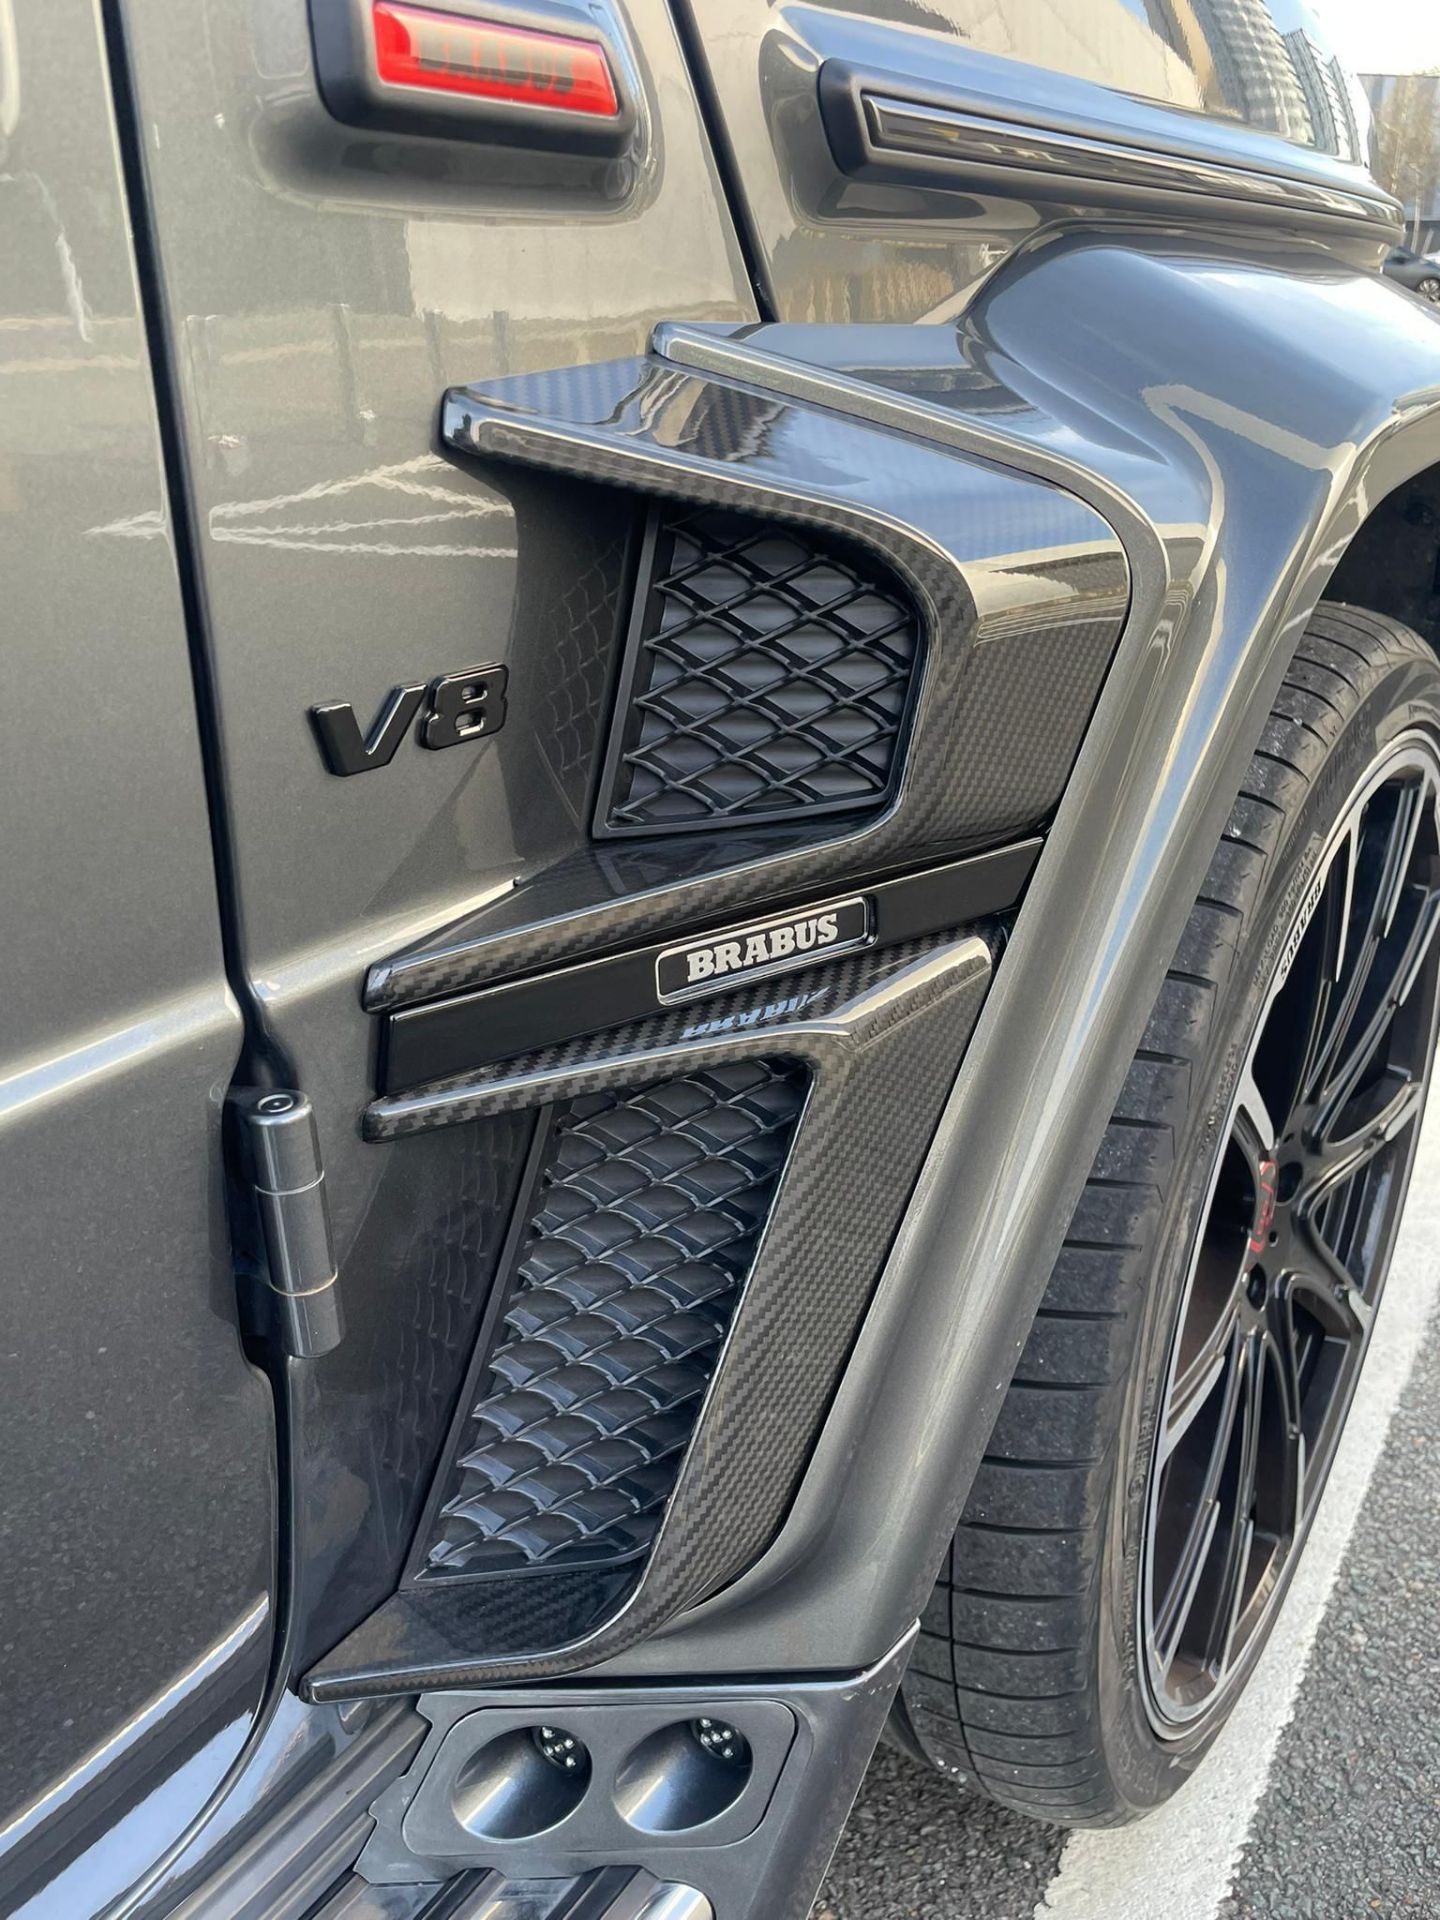 MERCEDES G63 BRABUS WIDE-STAR 800 STYLING GREY WITH BLACK LEATHER INTERIOR *PLUS VAT* - Image 21 of 23